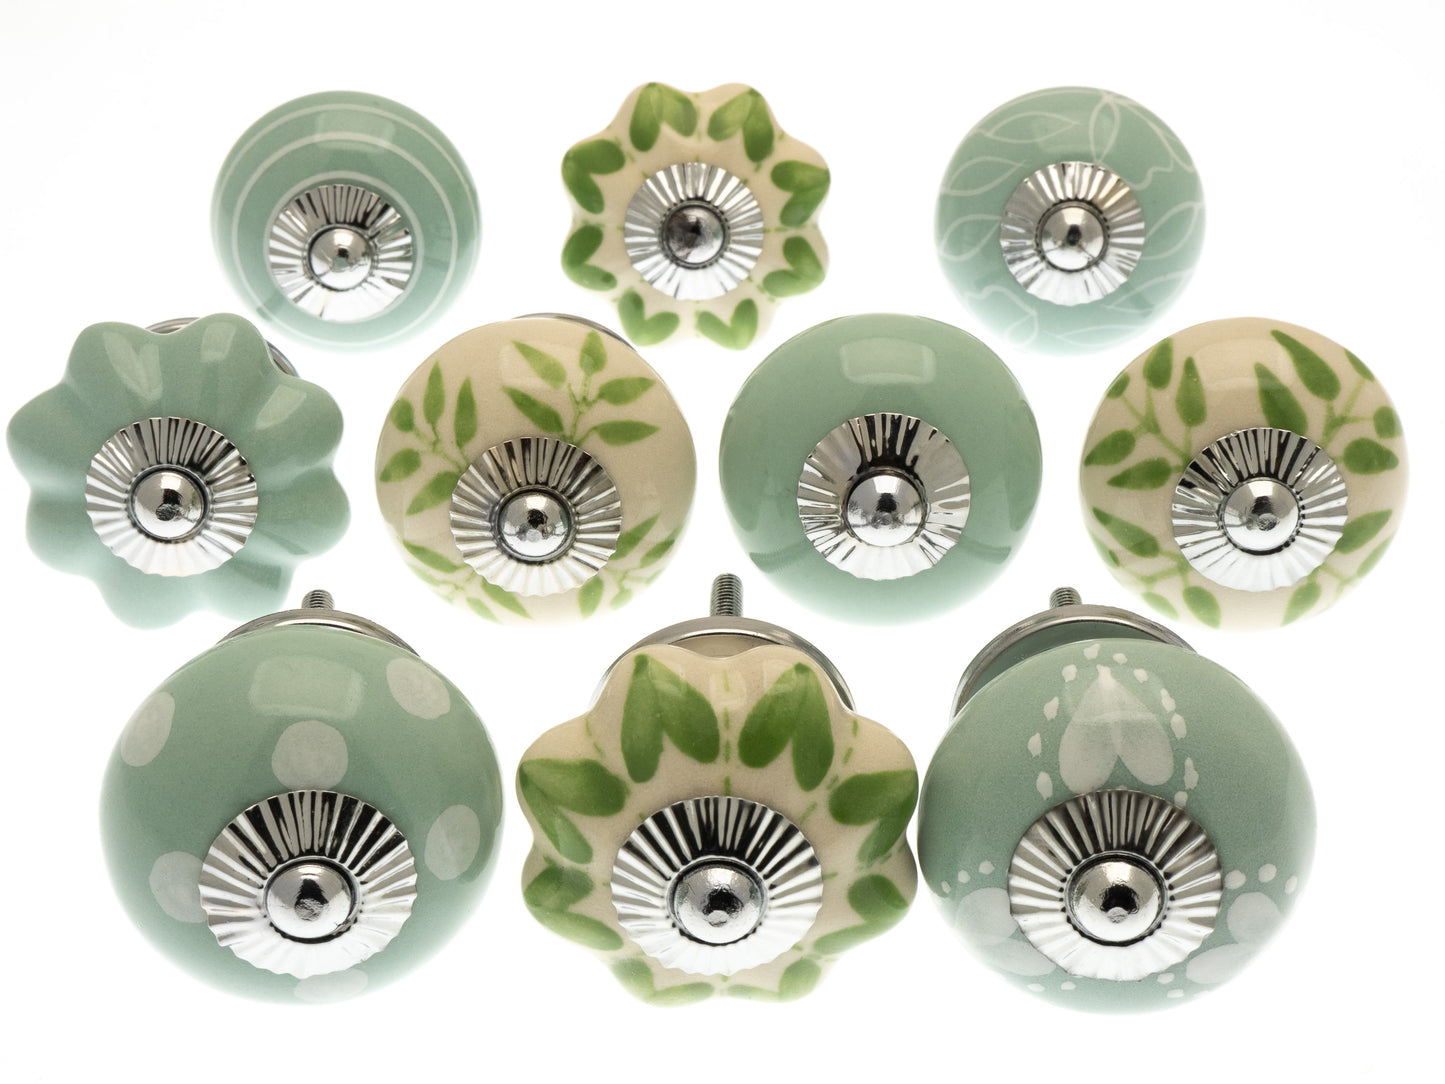 Hand Painted Door Knobs in Pale Mint Green and Cream Shades - Set of 10